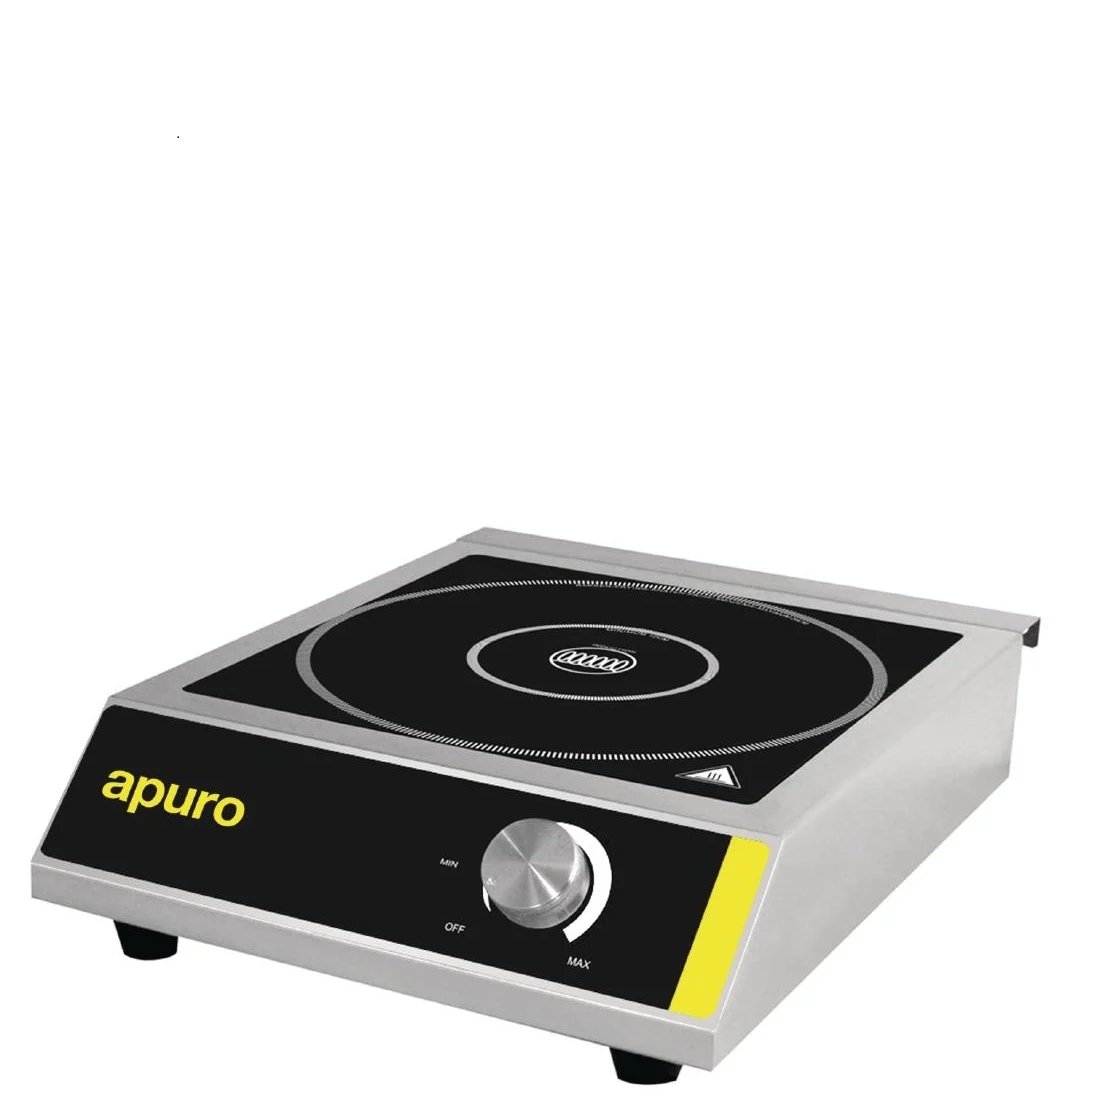 CE208-A Apuro Induction Cooktop 3kW